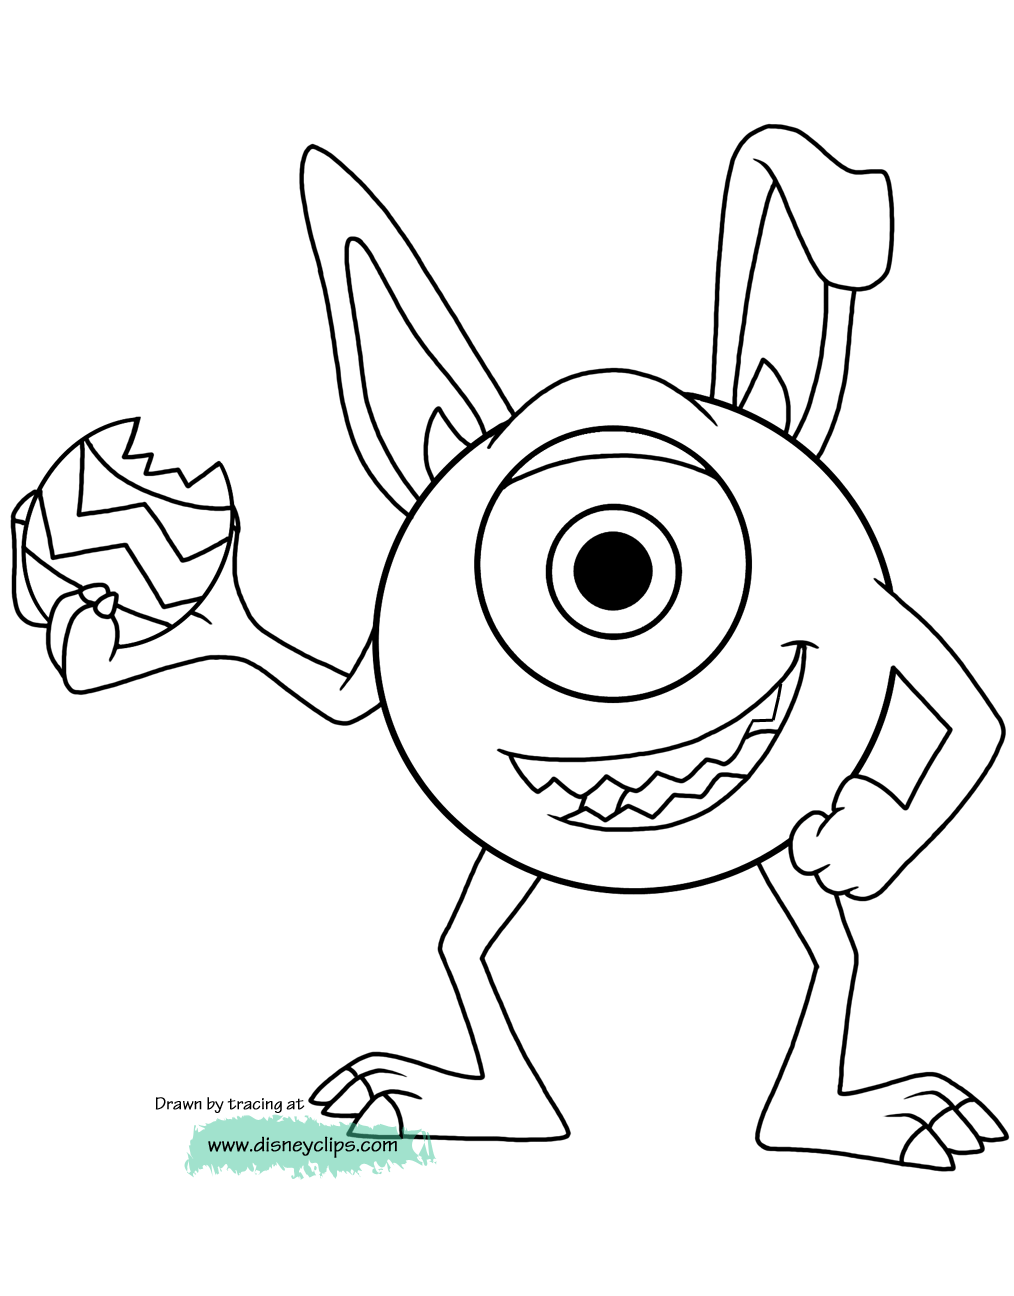 Shine Kids Crafts: Easter Free Printable Coloring Pages ...